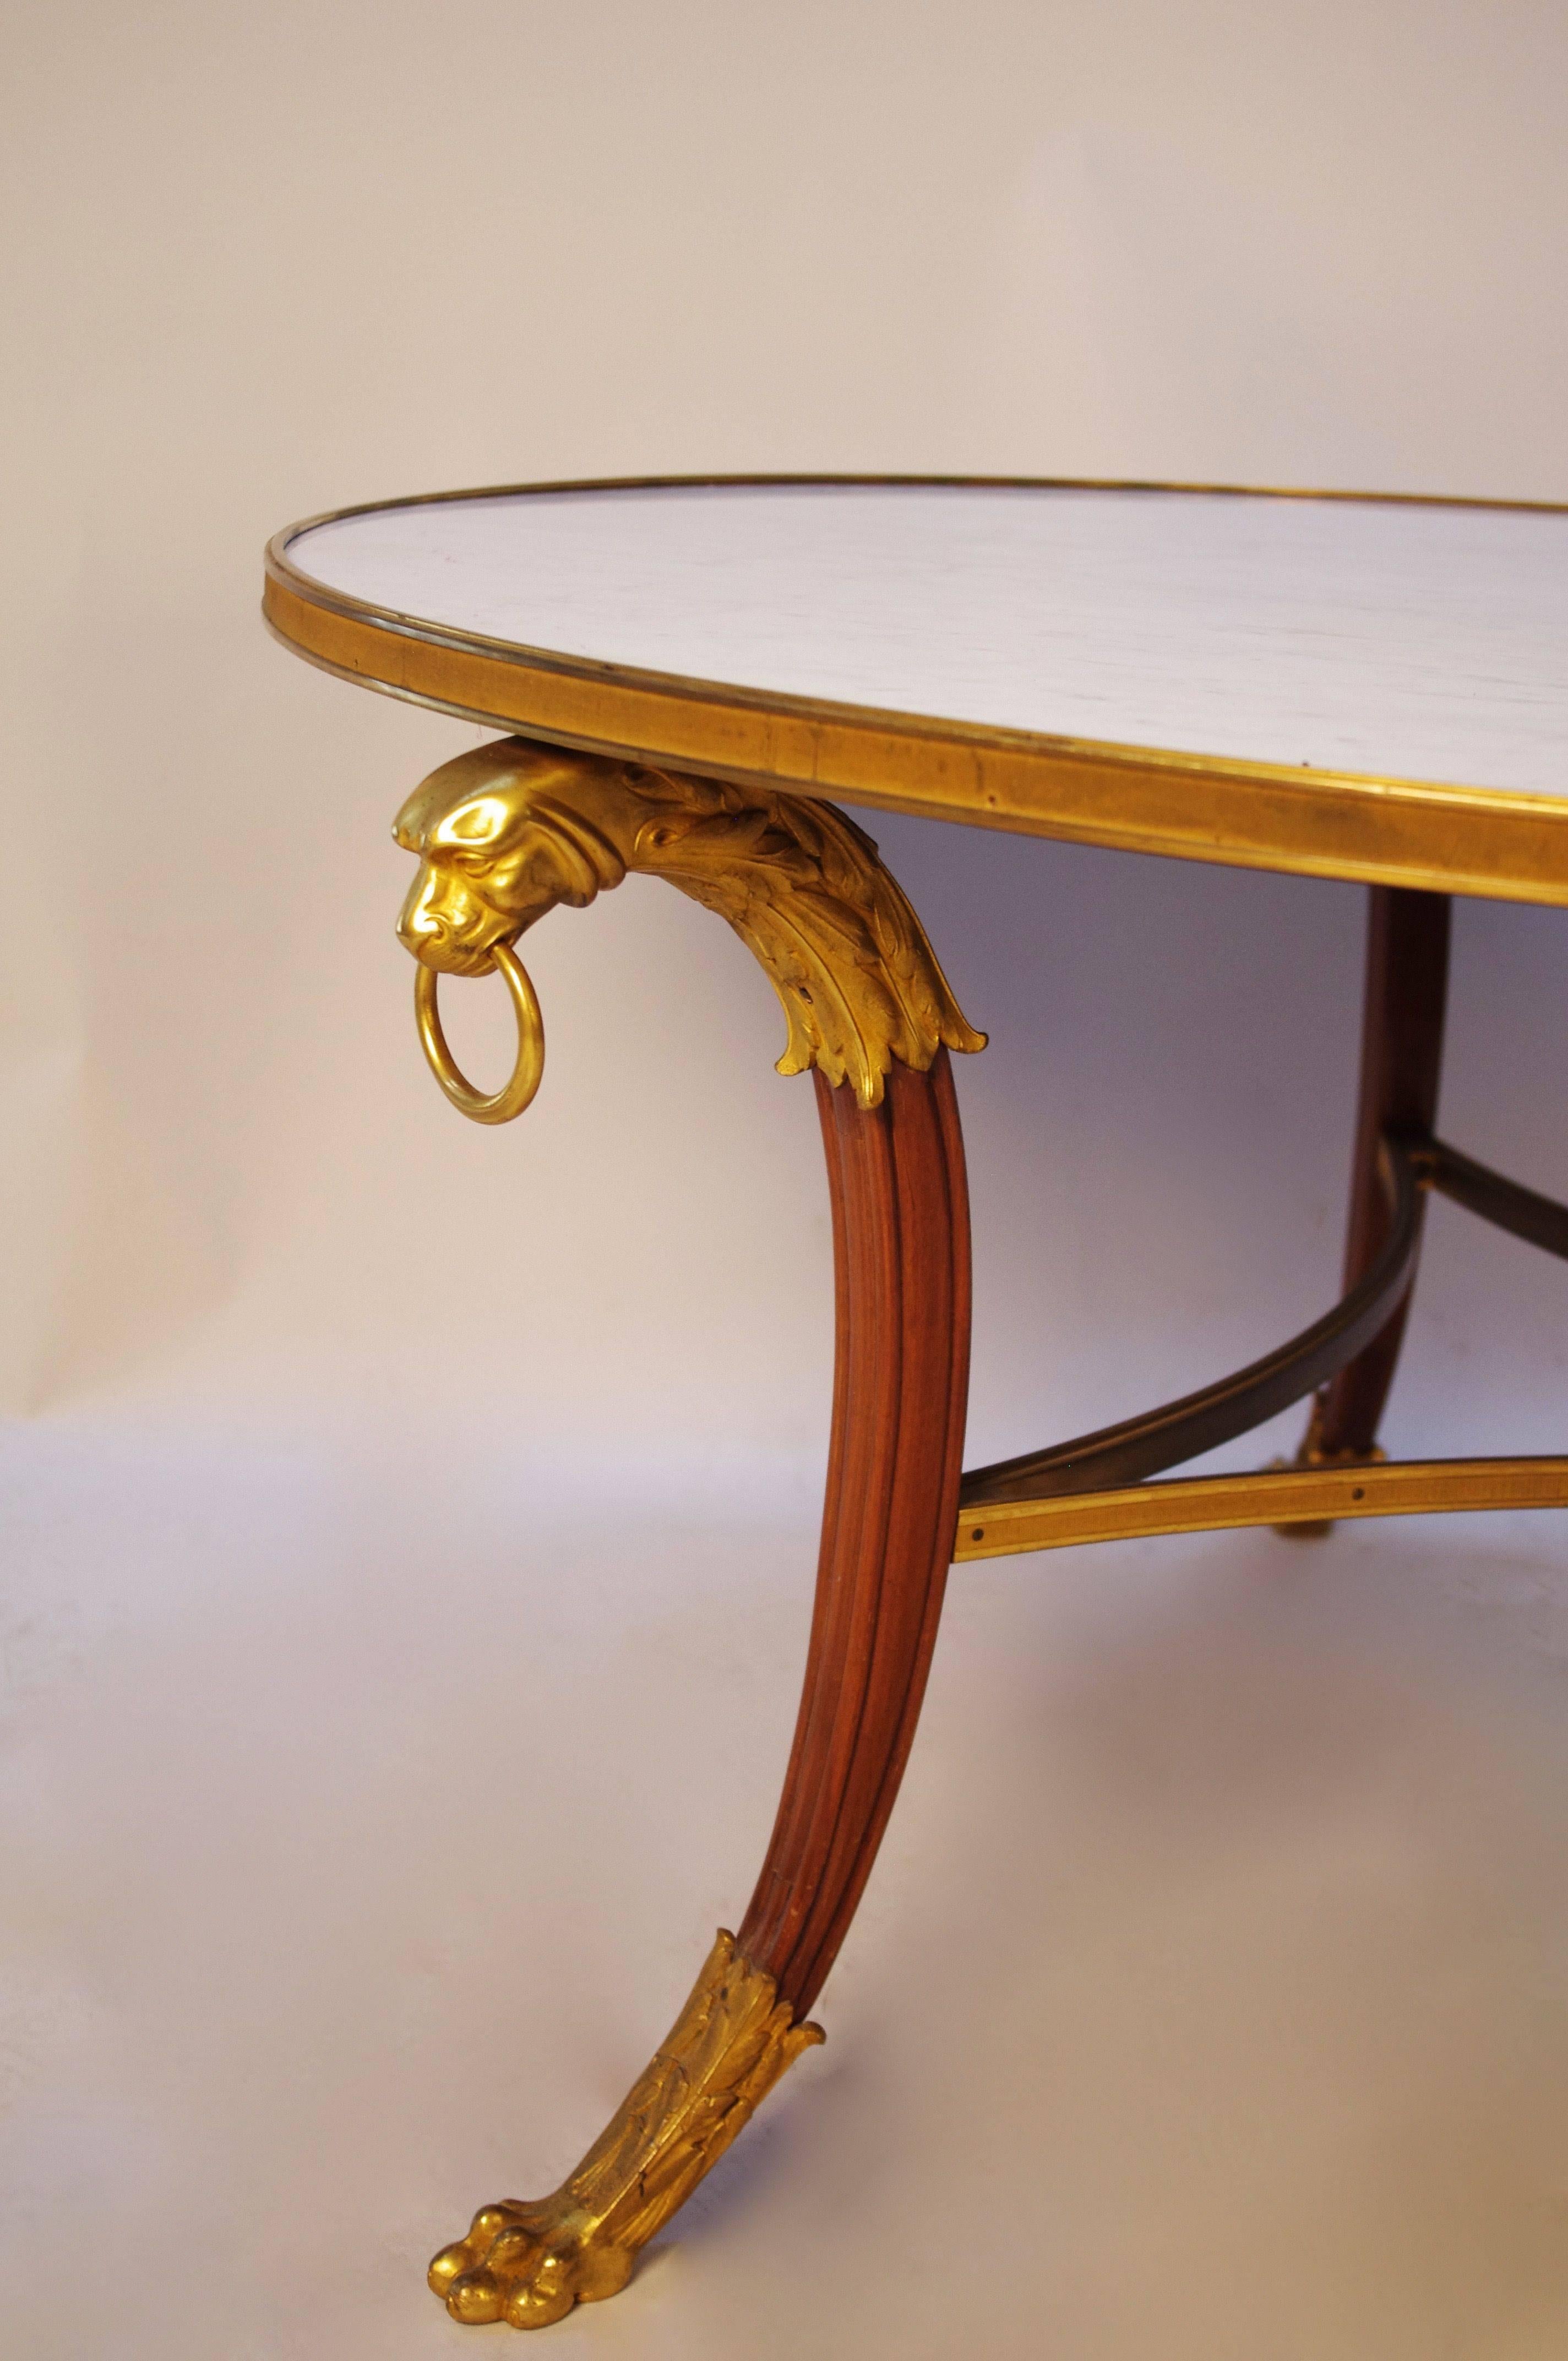 Maison Rinck.
Stamped.
Gilt bronze.
Empire style.
Tripode base in wood and gilt bronze.
Work from 1950.
White carrare marble top.